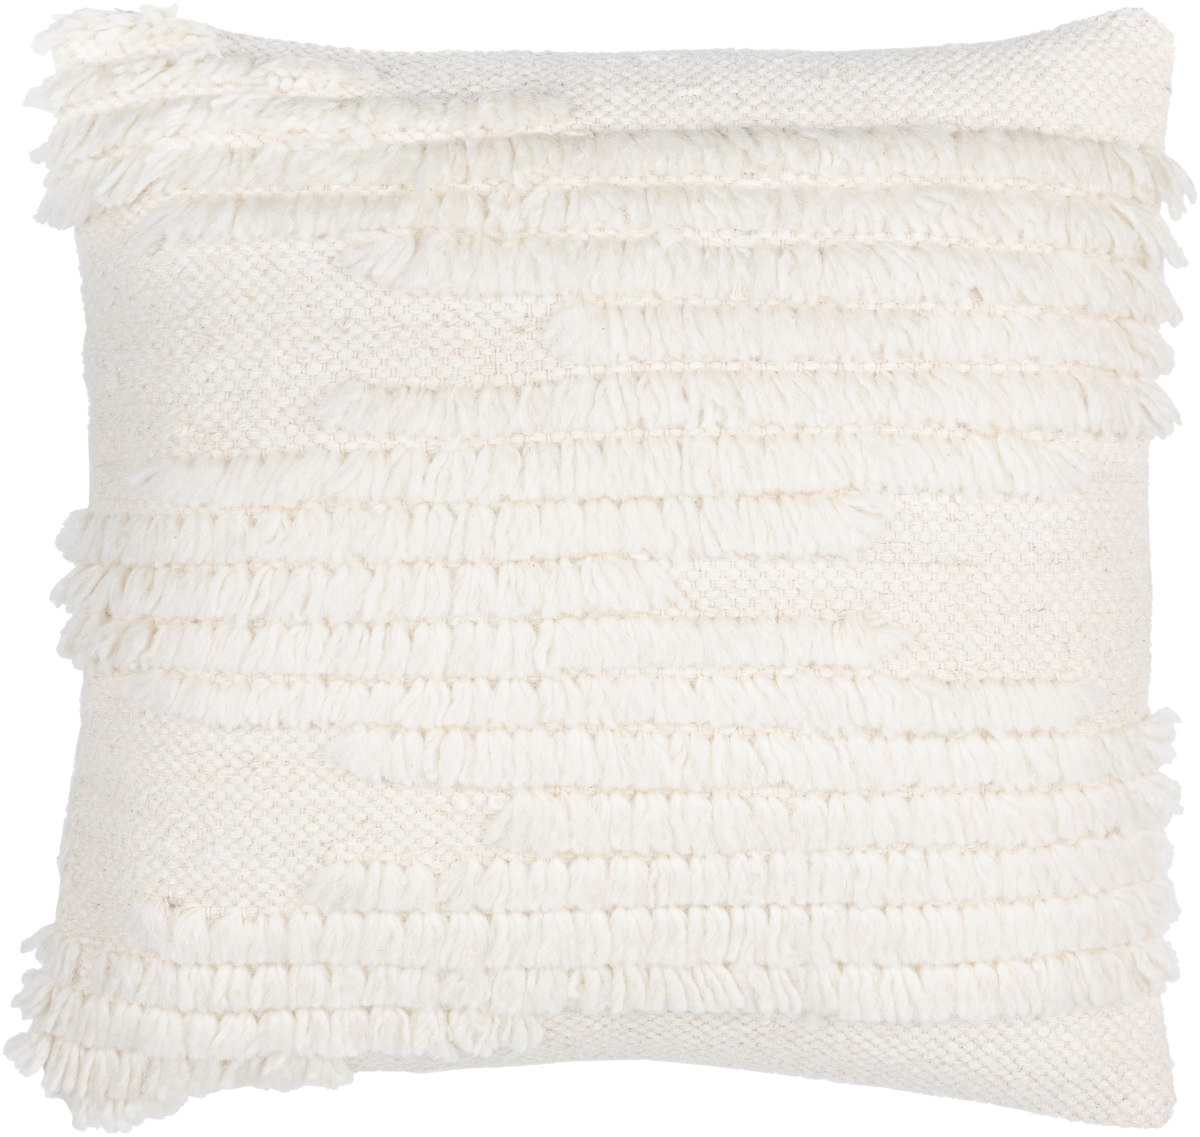 Picture of Livabliss APA001-1818D 18 x 18 in. Apache APA-001 Pillow Cover with Down Insert, Cream